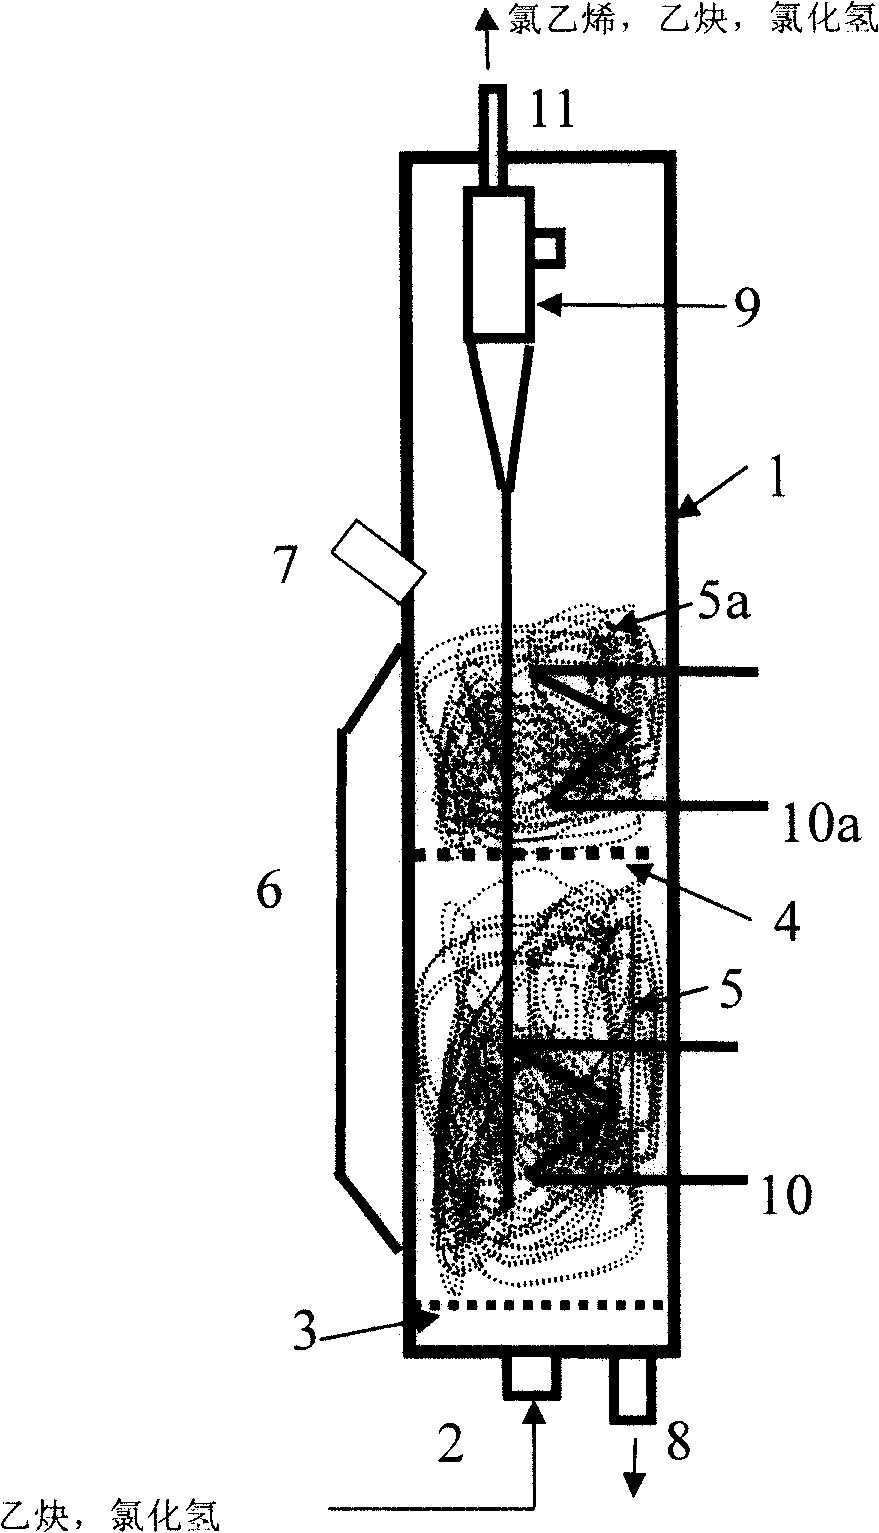 Multiple stage fluidized-bed reactor and method for synthesizing chloroethylene